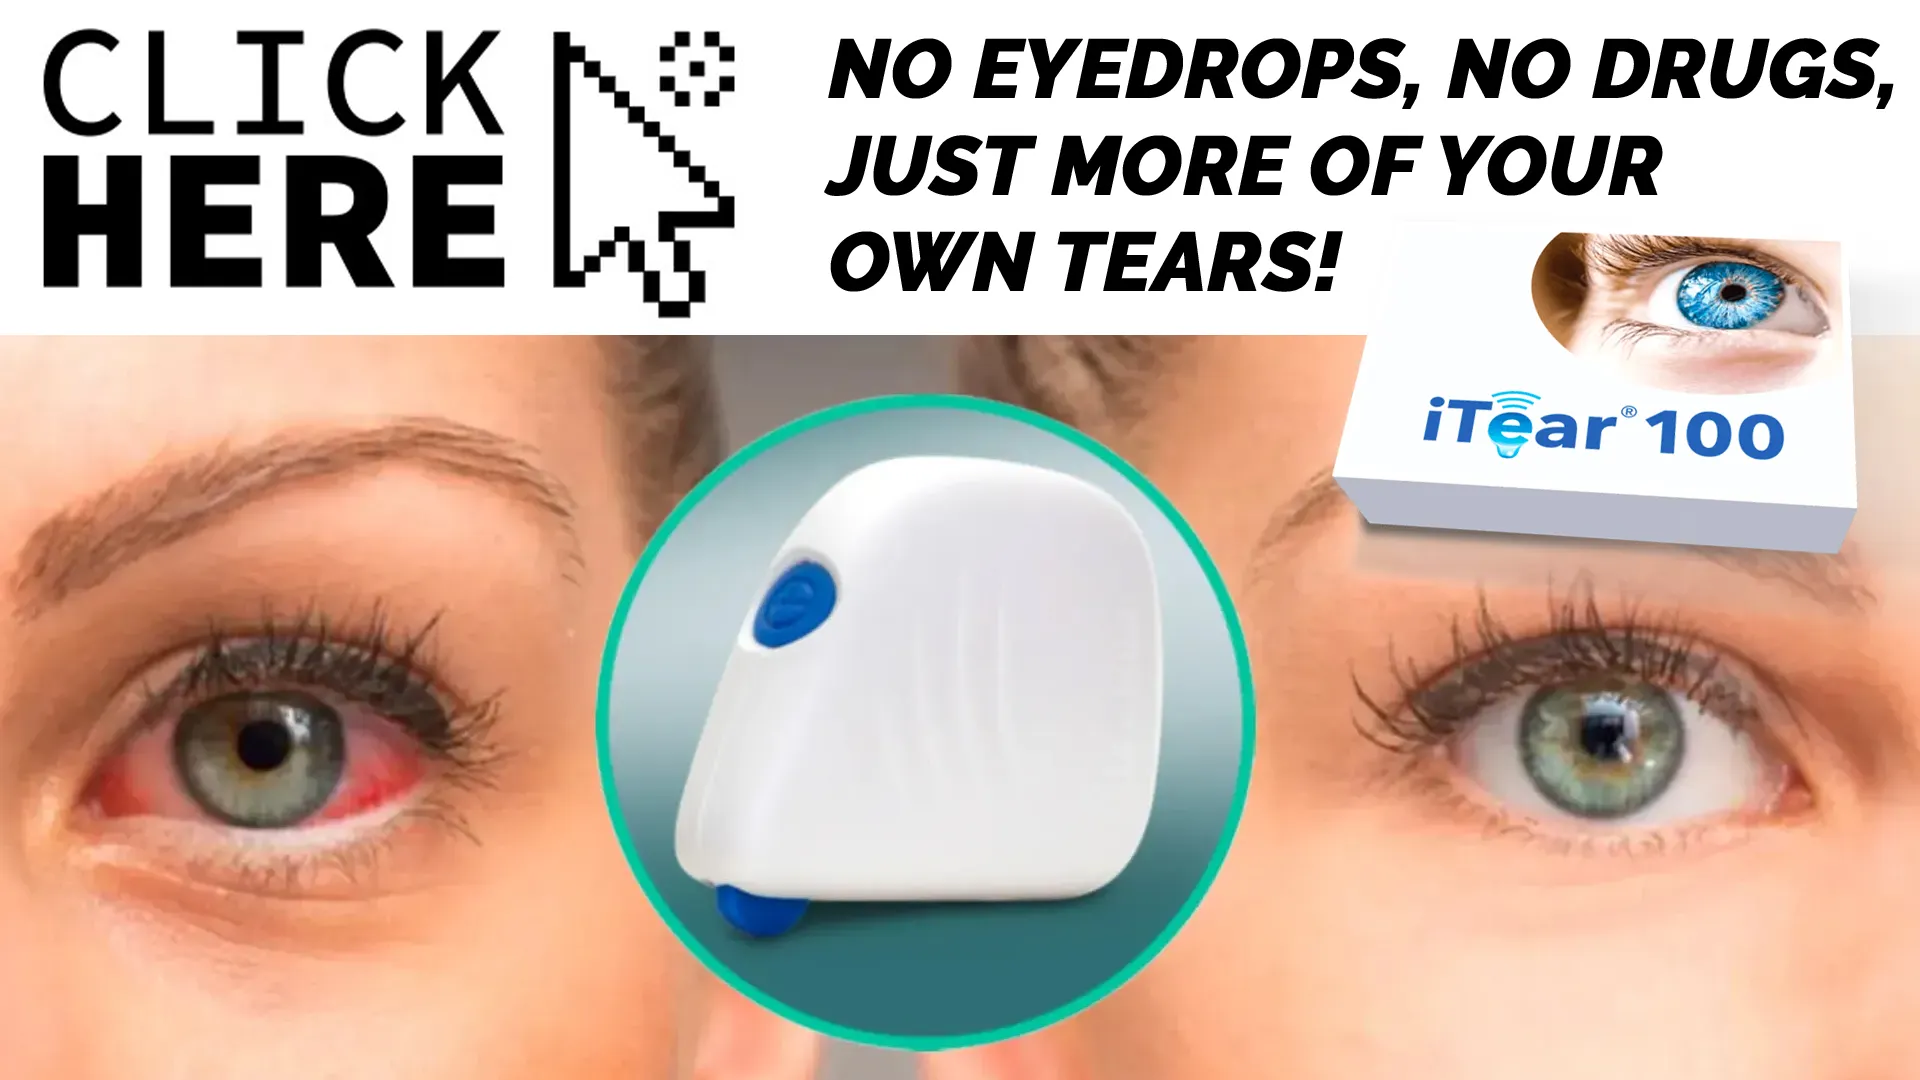 Introducing the iTEAR100 Device for Dry Eye Relief